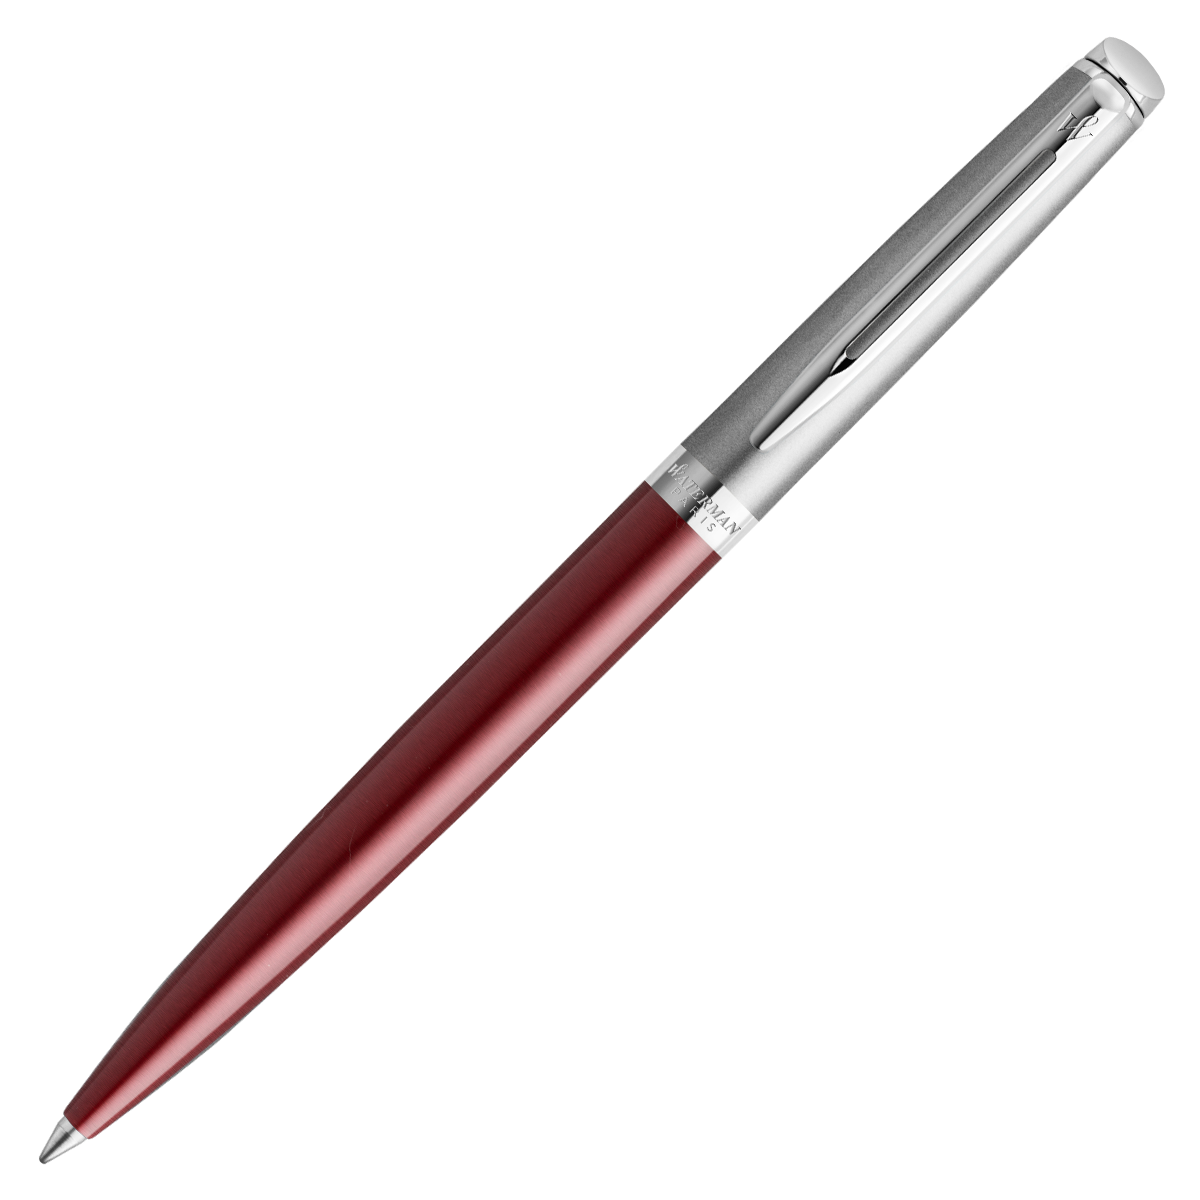 Hémisphère Essential Red/Chrome Ballpoint Pen in the group Pens / Fine Writing / Ballpoint Pens at Pen Store (128032)